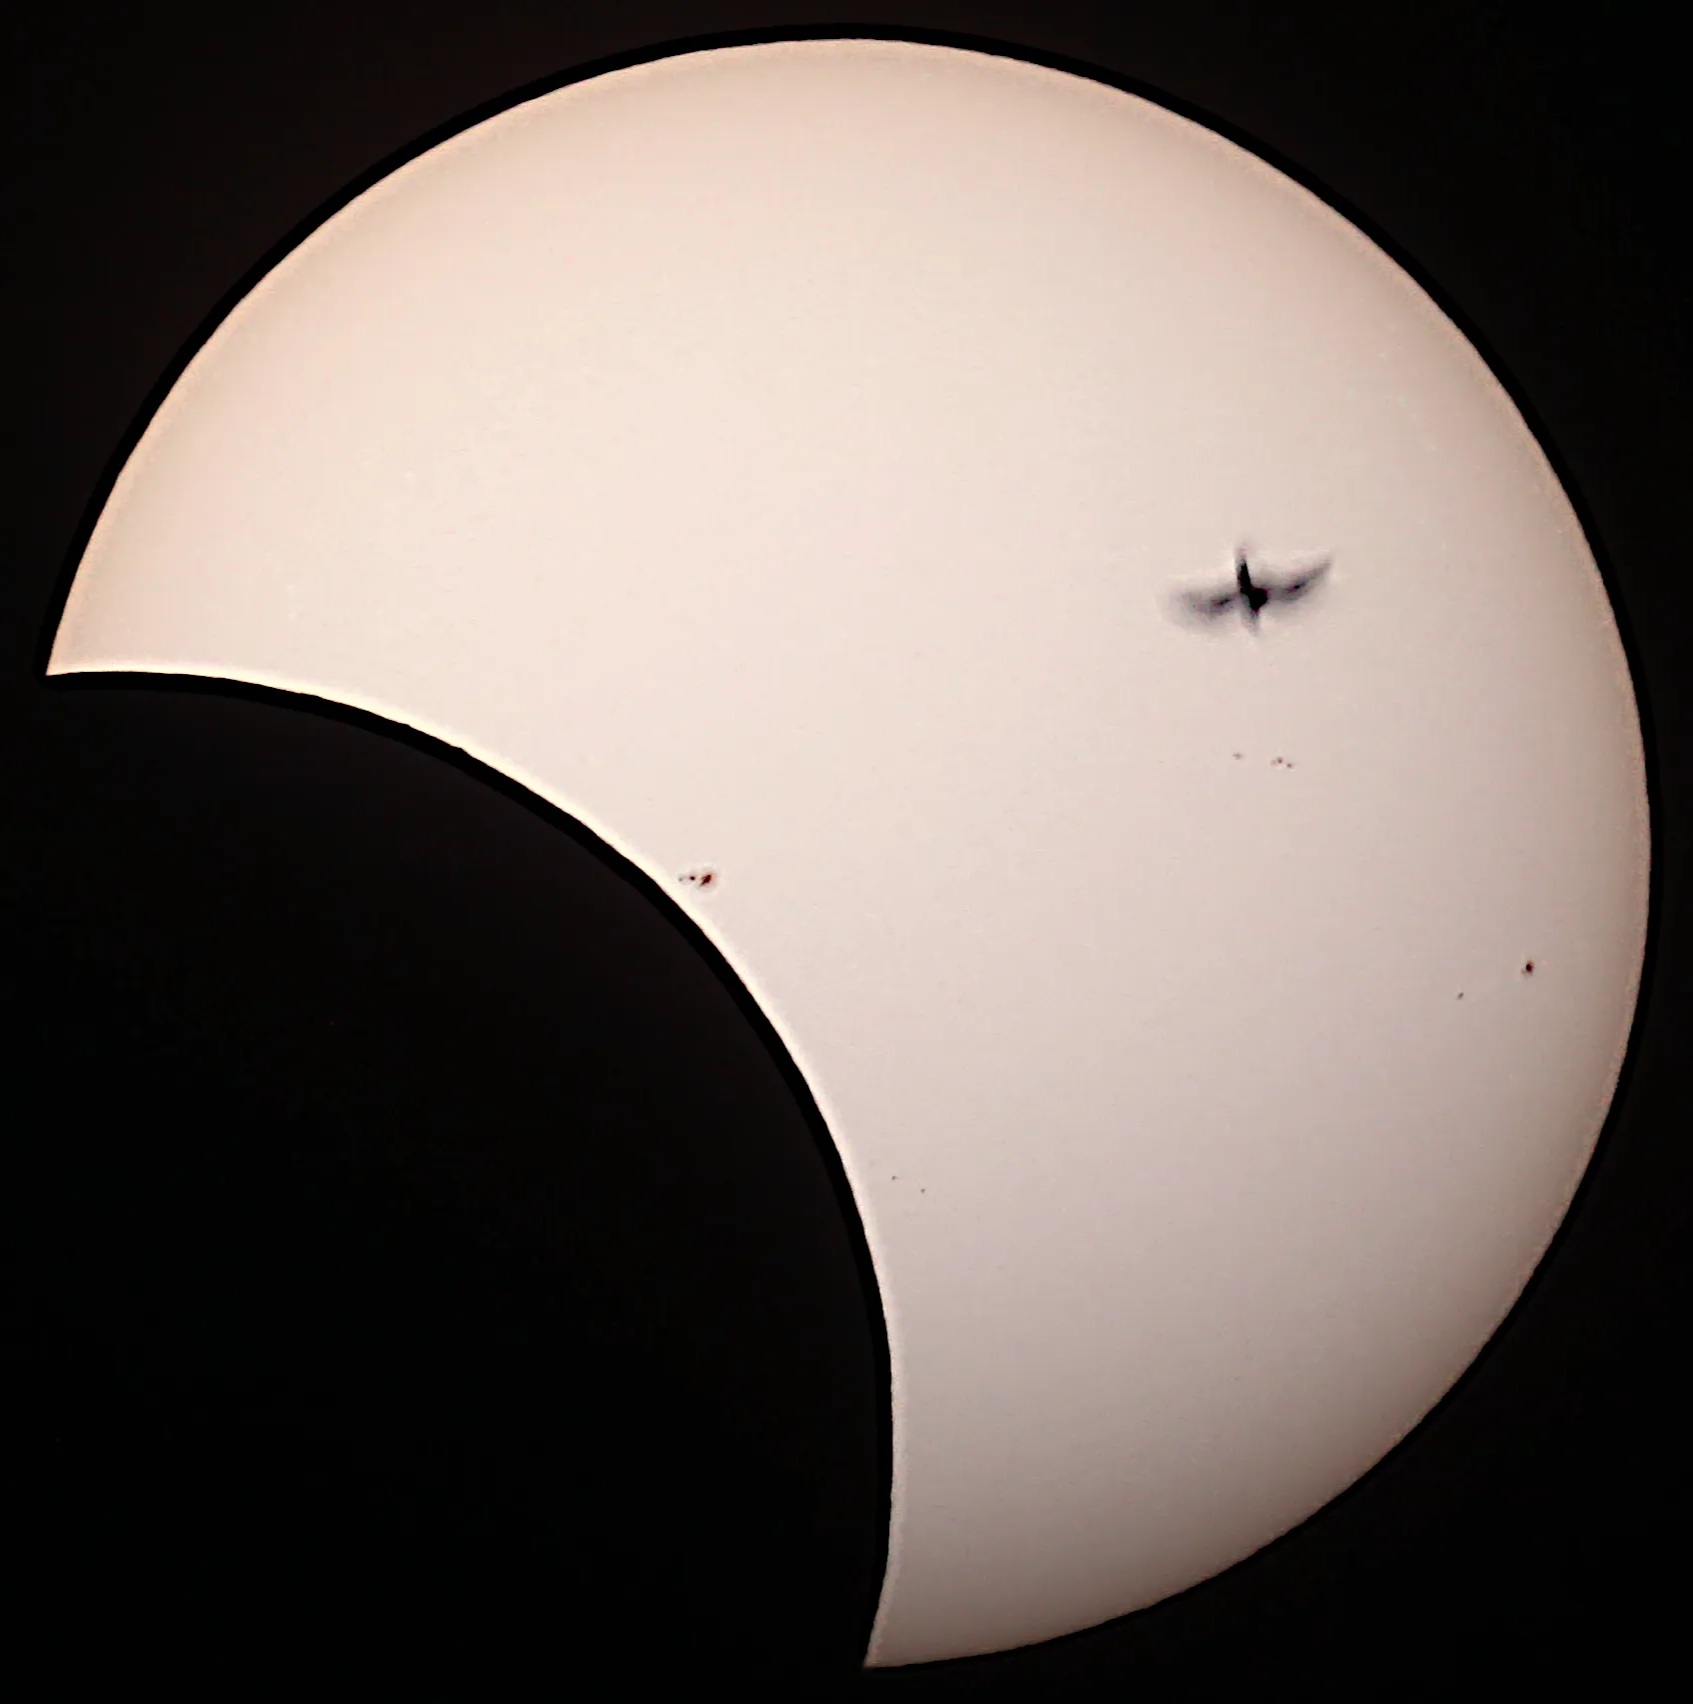 Solar eclipse with a bird and sunspots.